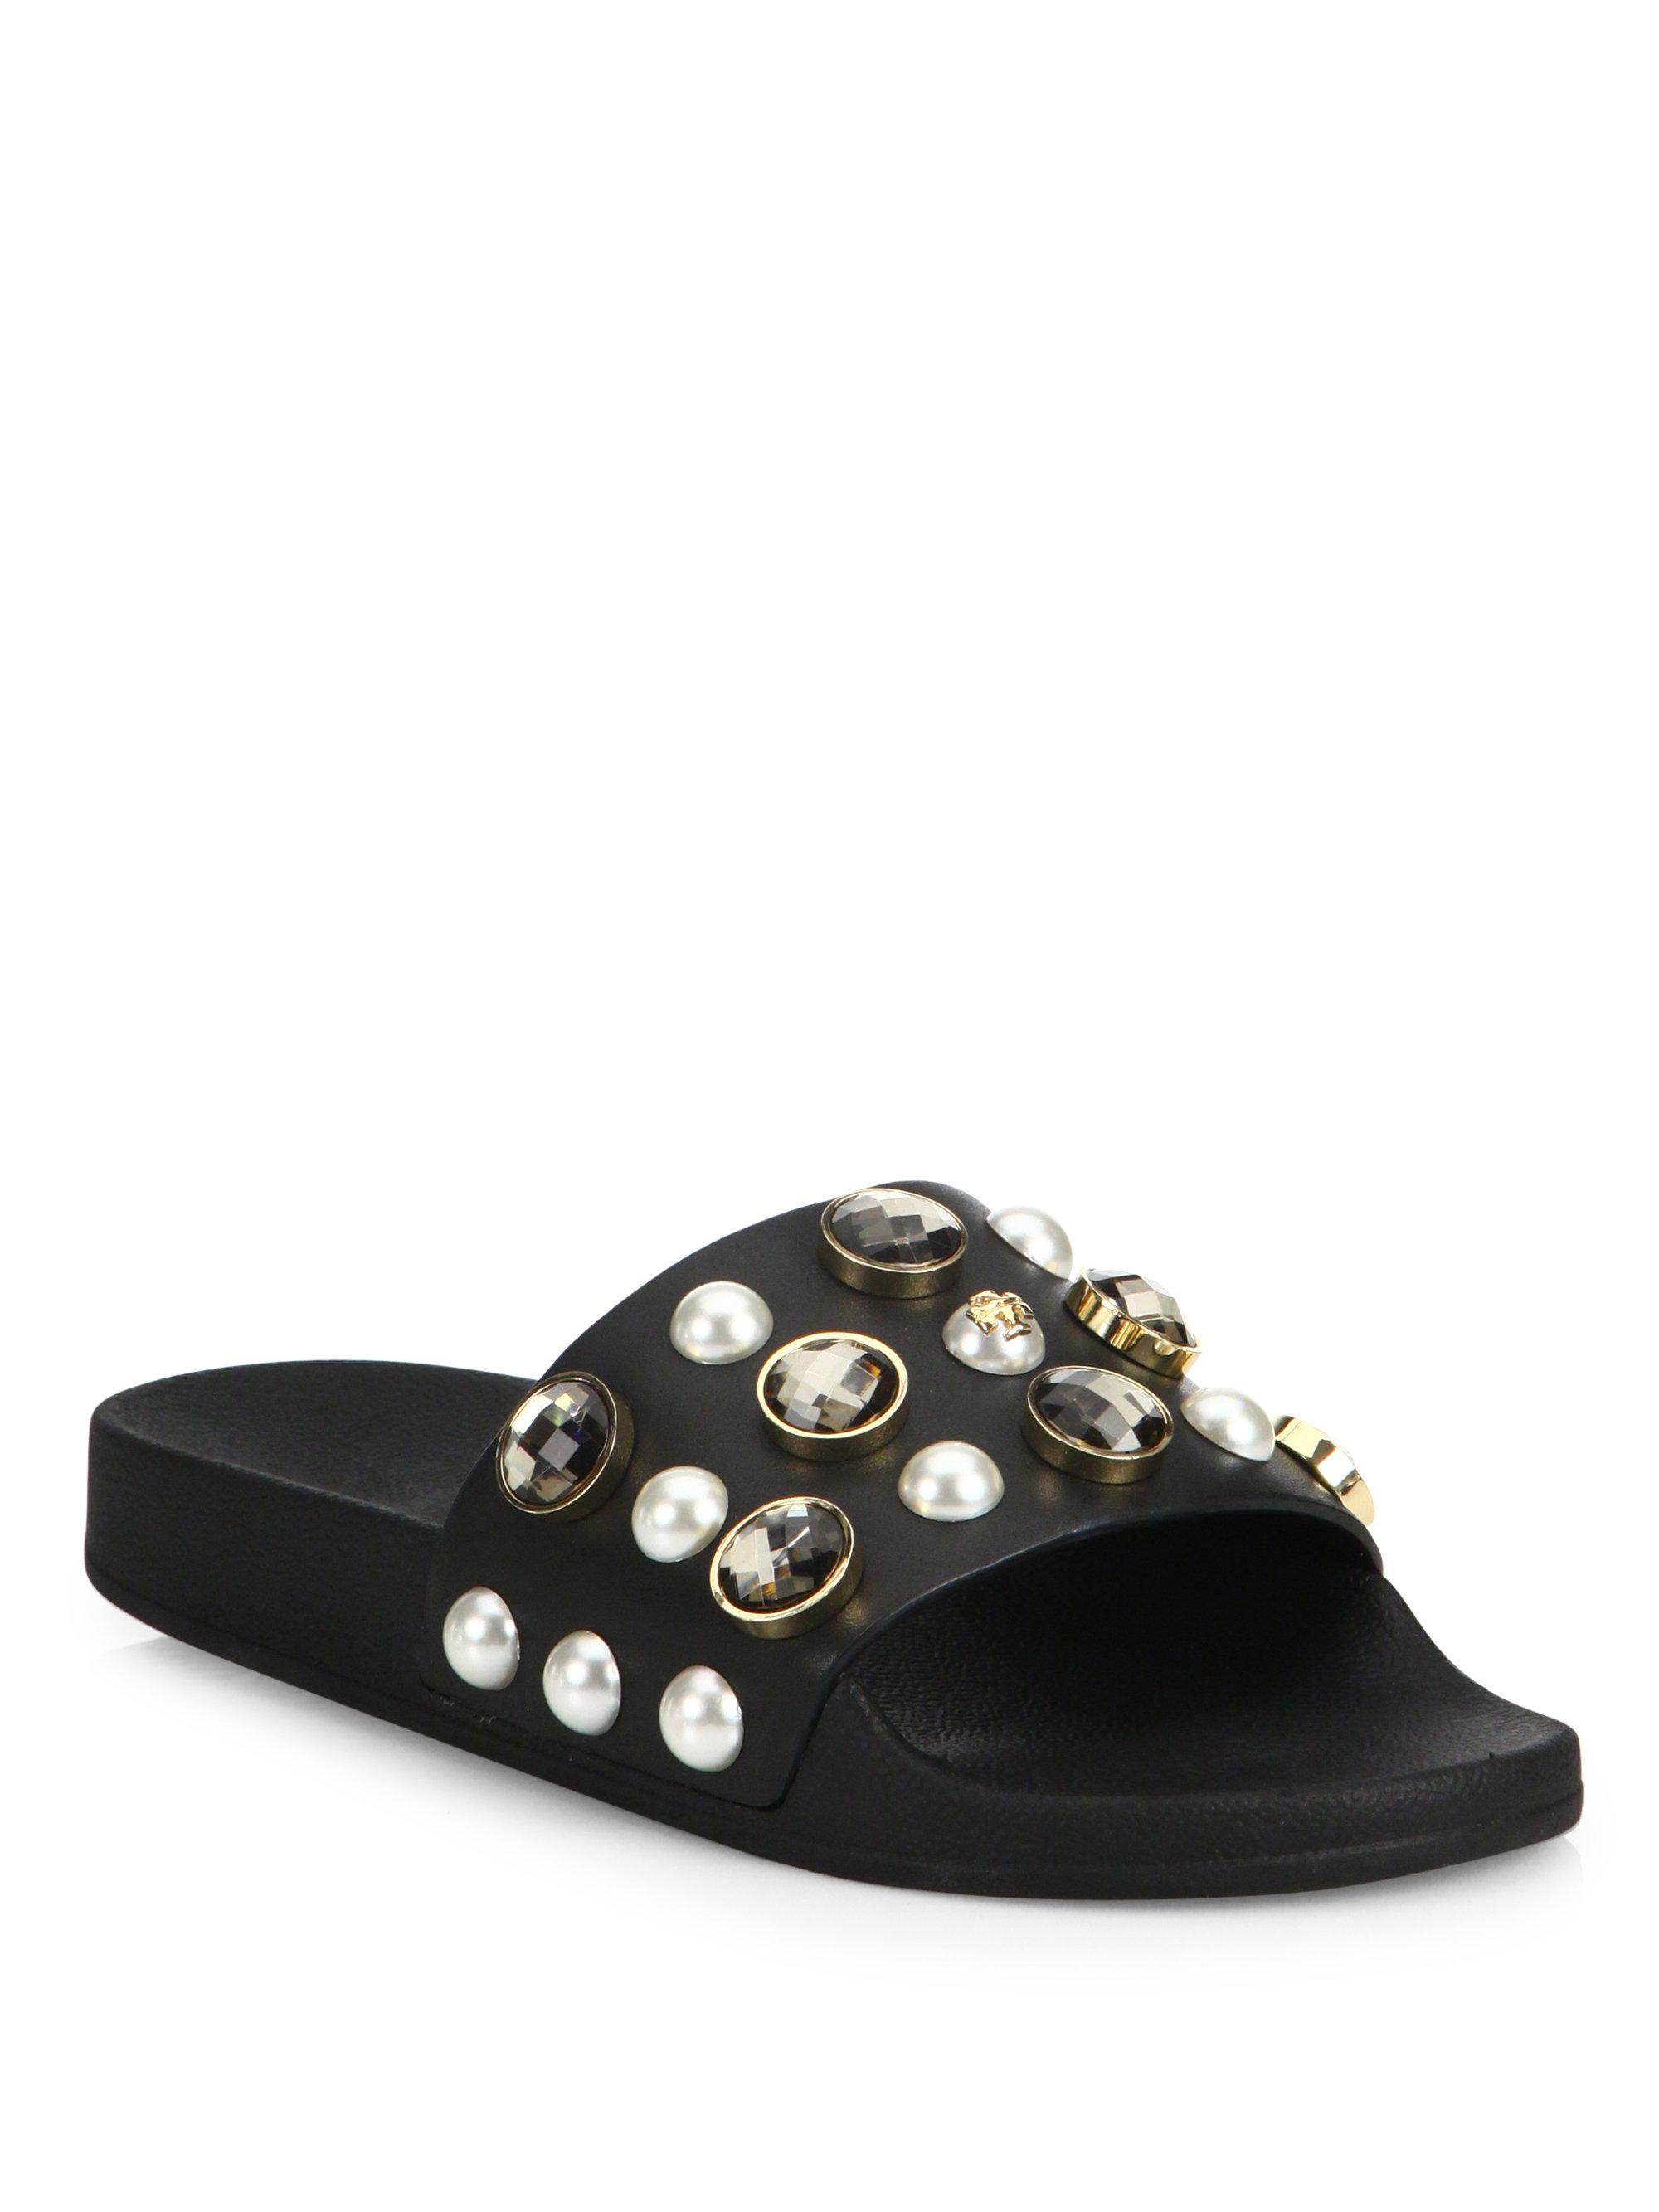 Tory Burch Vail Jeweled Leather Slides in Black | Lyst